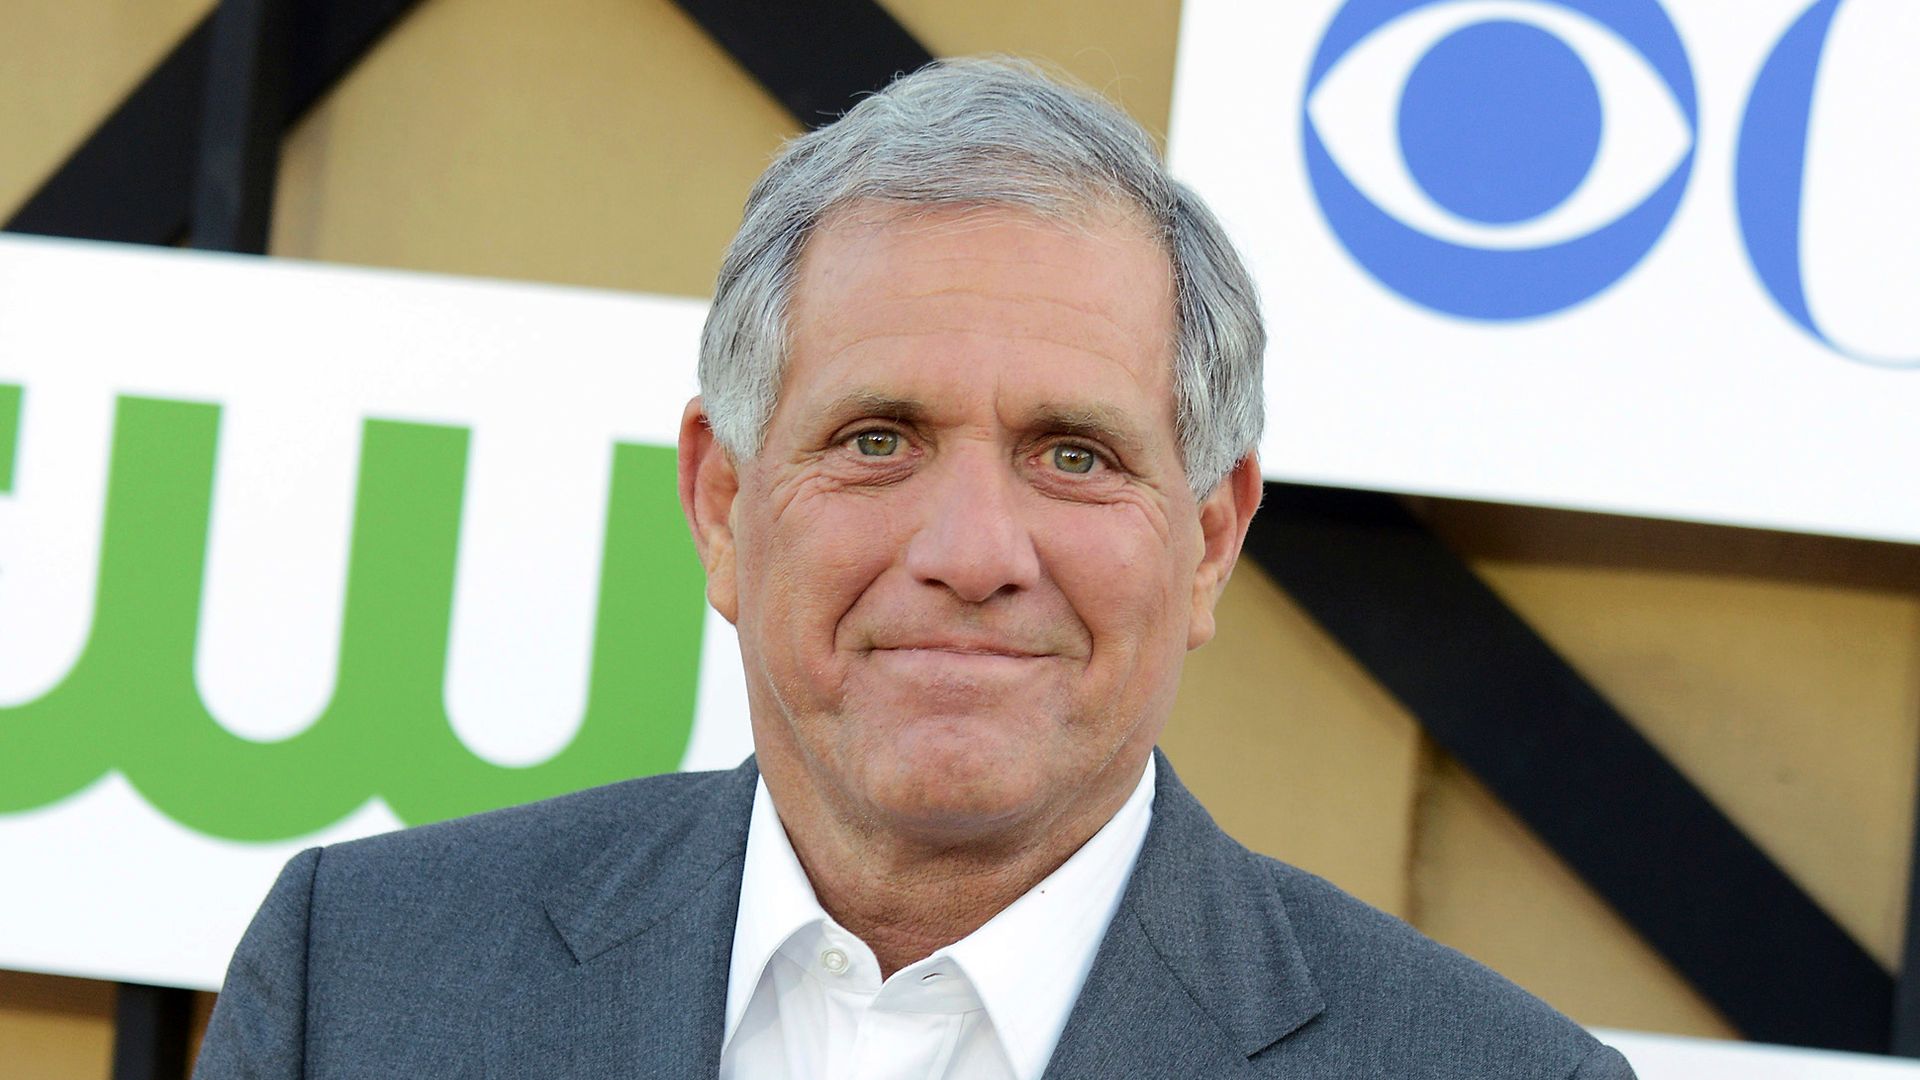 The lawyer who, while representing CBS, provided crucial information in the #MeToo toppling of Les Moonves does not deserve to practice law.